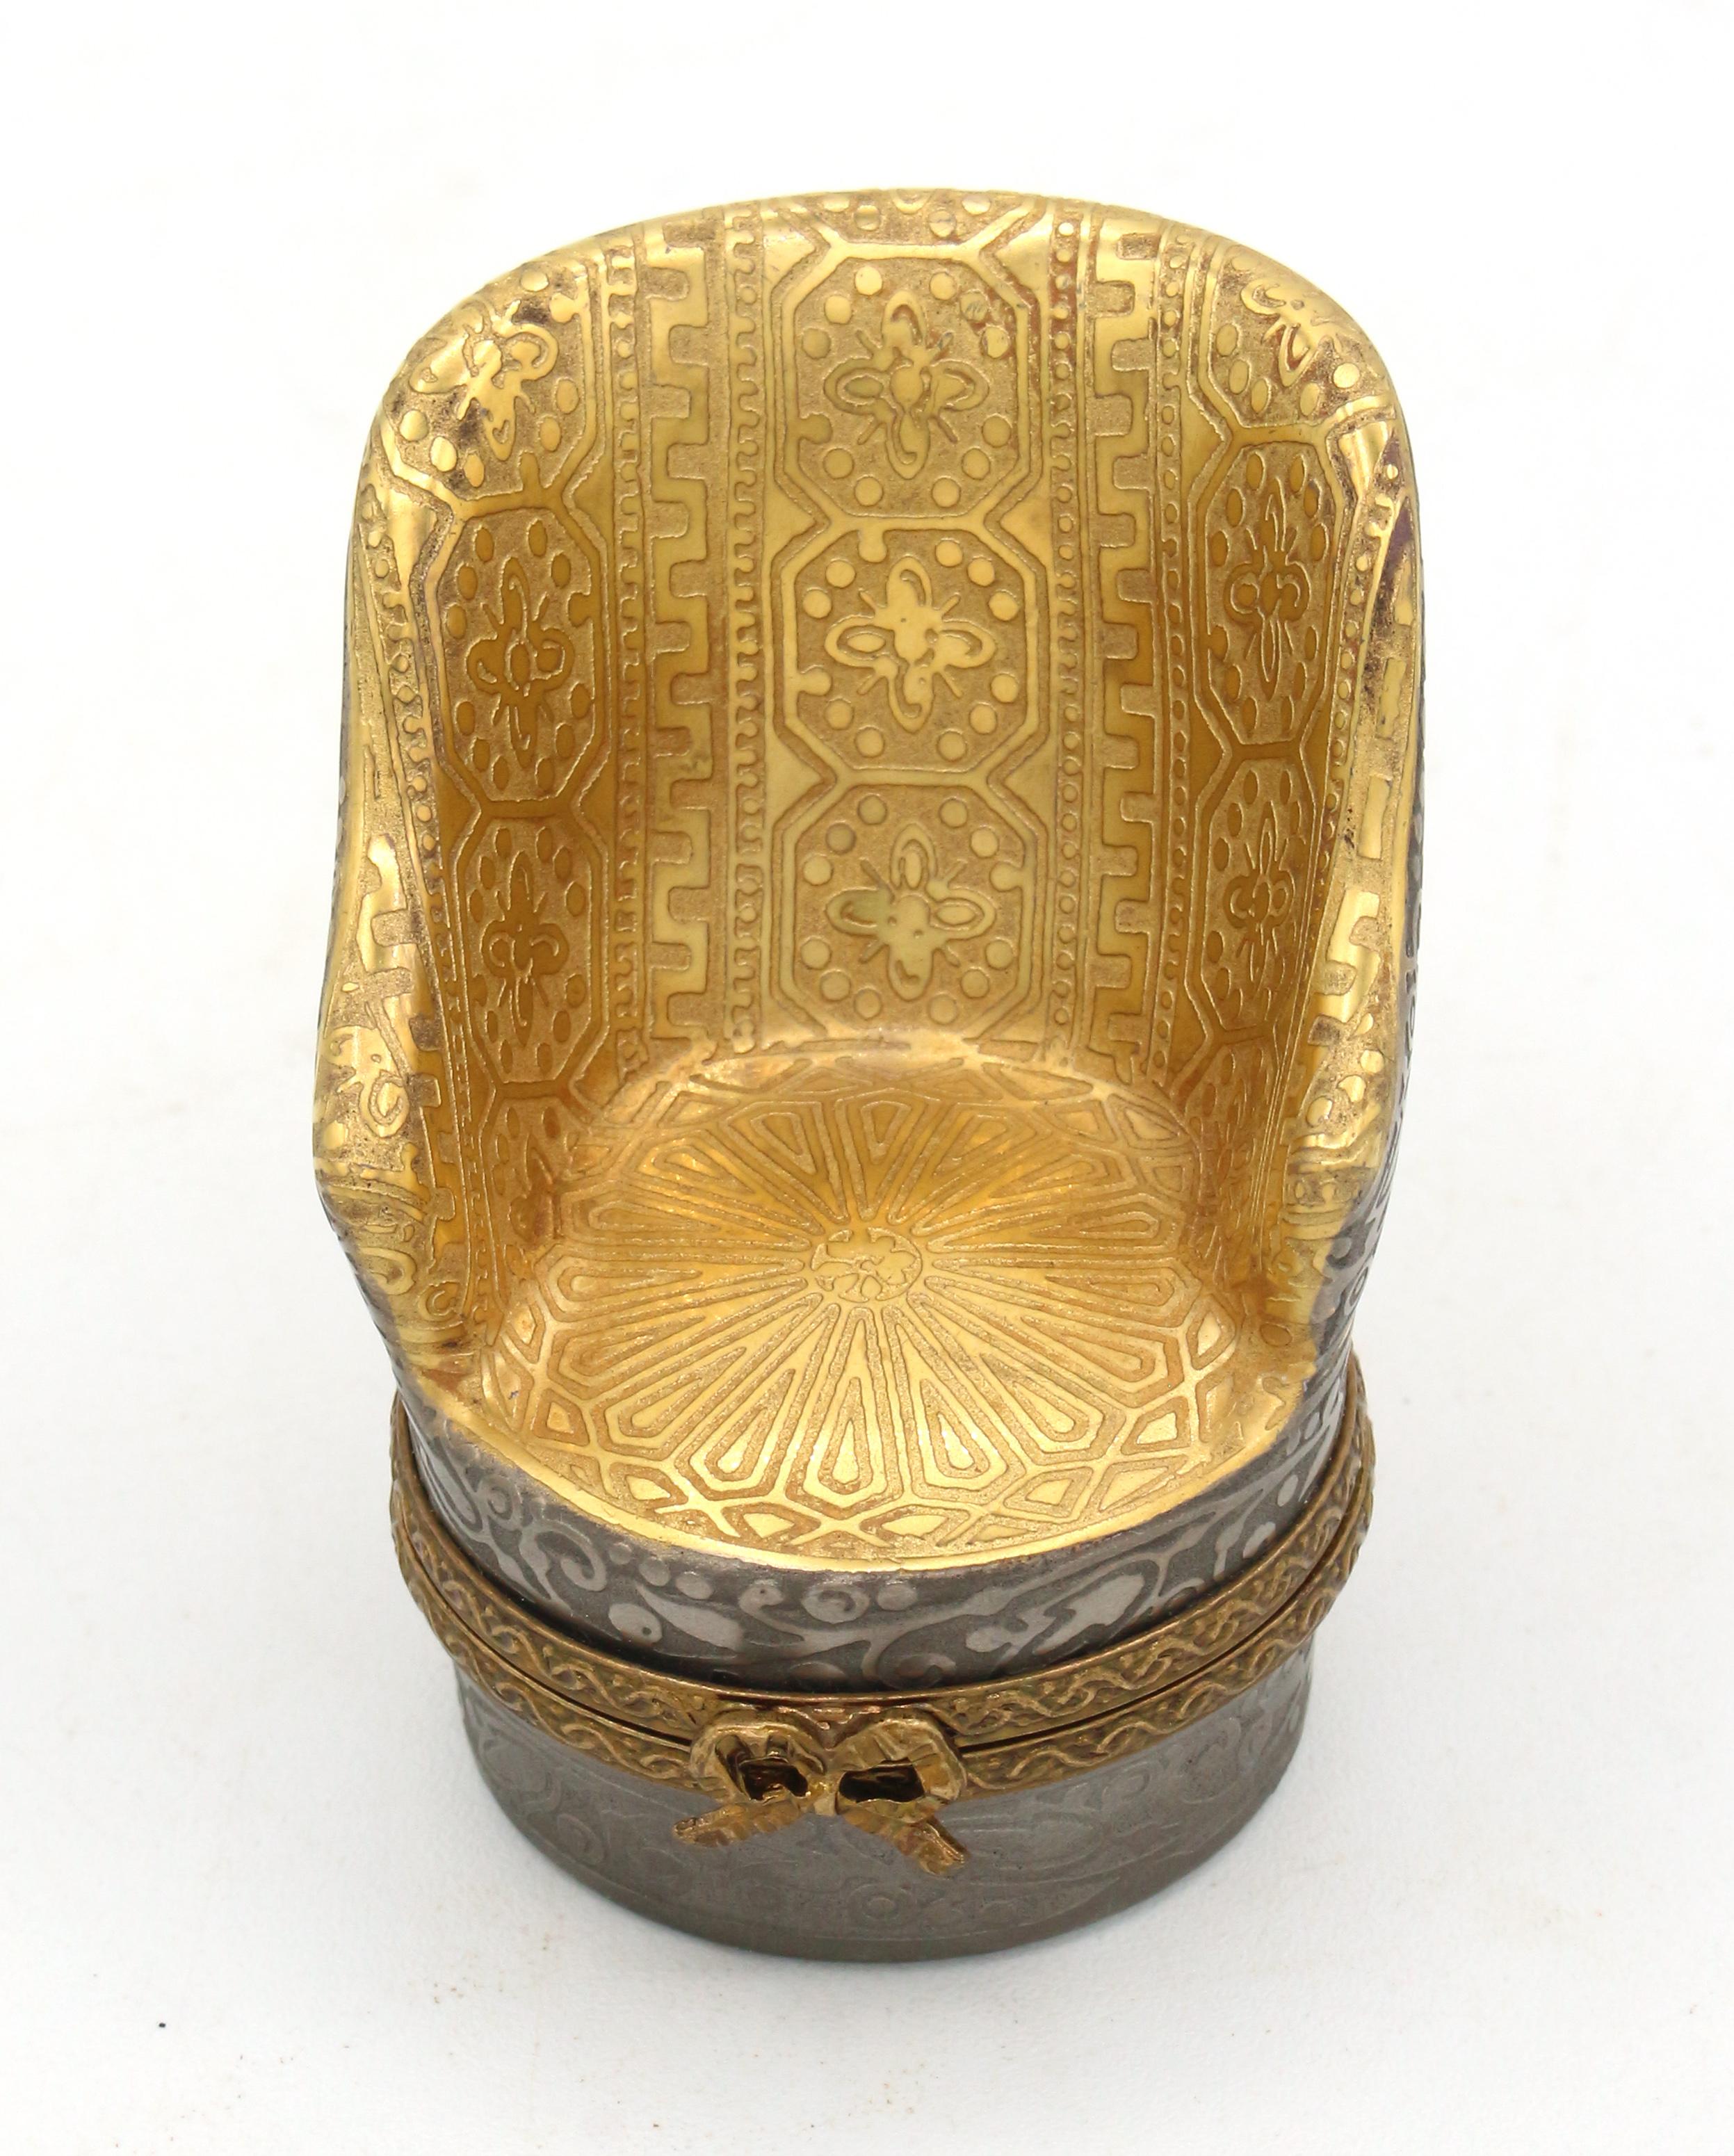 Limoges trinket or pill box in the form of a bergere chair, French later 20th century. 24k gold & silver encrused. Marked: Limoges France, Porcelaine D'Art Du Cruou, MCLS, Made in France.
1 5/8